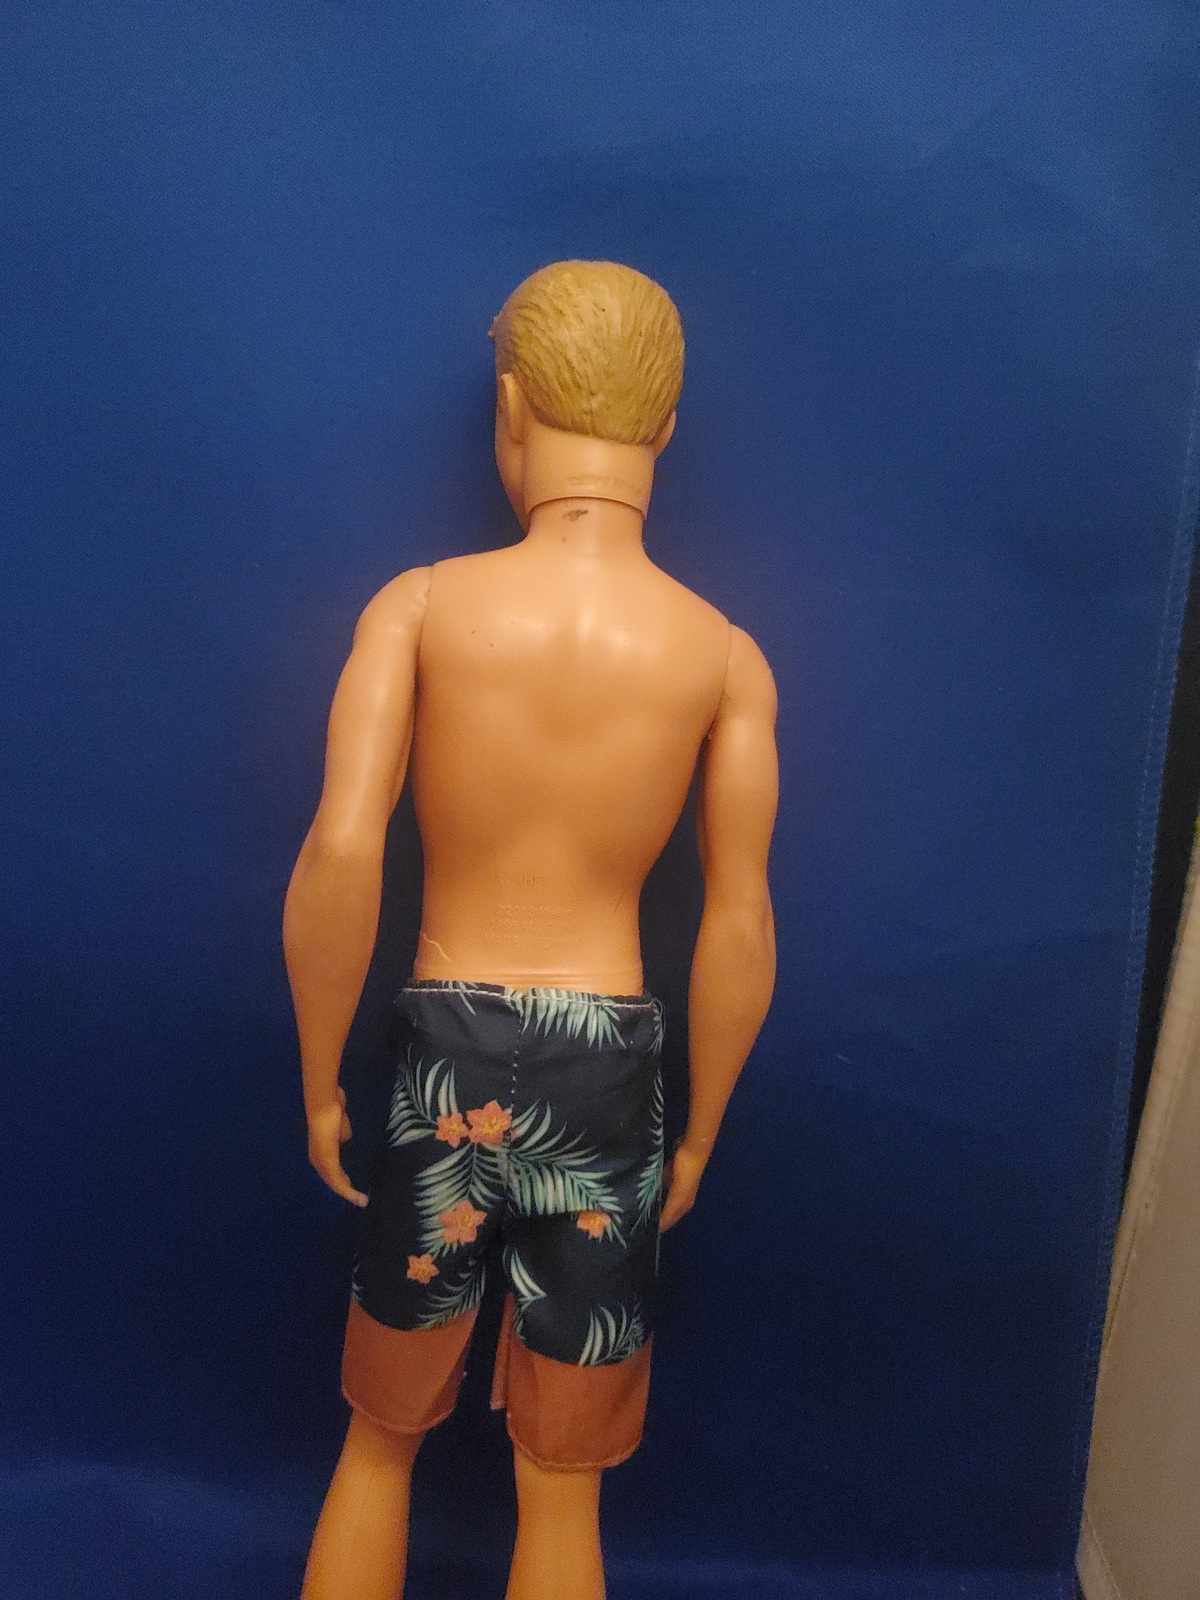 Ken Doll with Swim Trunks and Beach Accessories